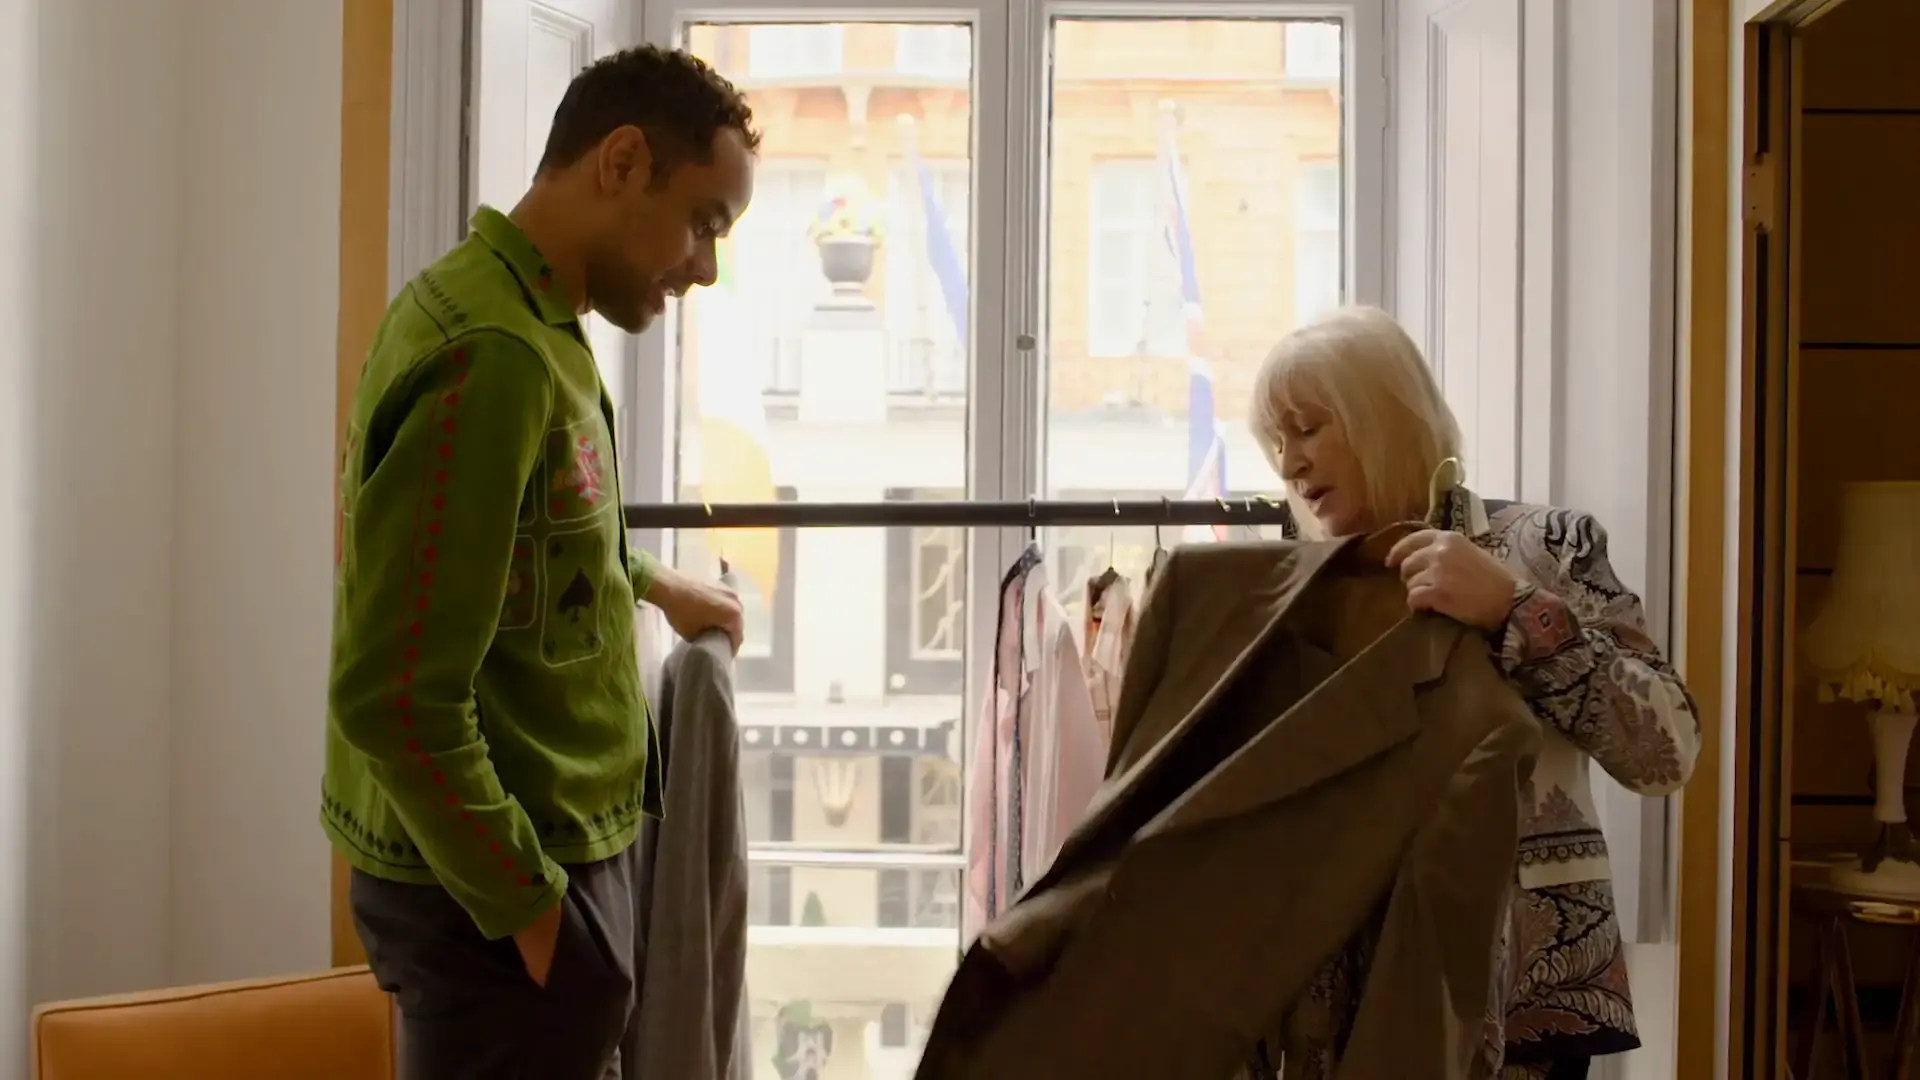 OOTO London, as seen in Good Morning Vogue Episode 4: Exclusive New Footage From House of Gucci